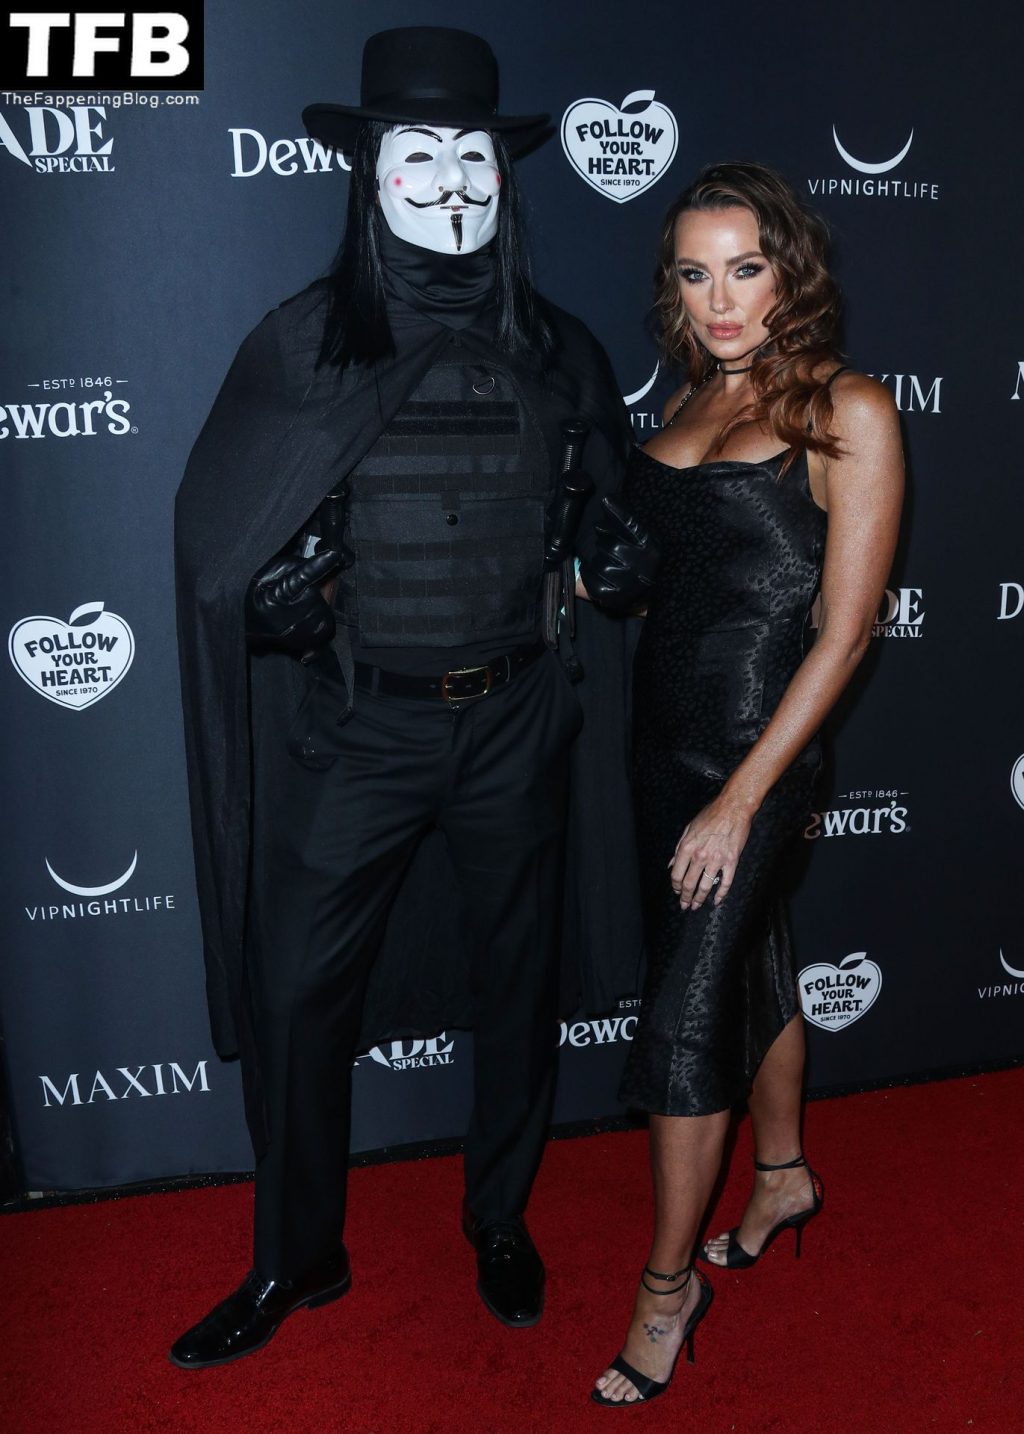 Busty Amber Nichole Miller Looks Hot in Black at the 2021 Maxim Halloween Party (5 Photos)